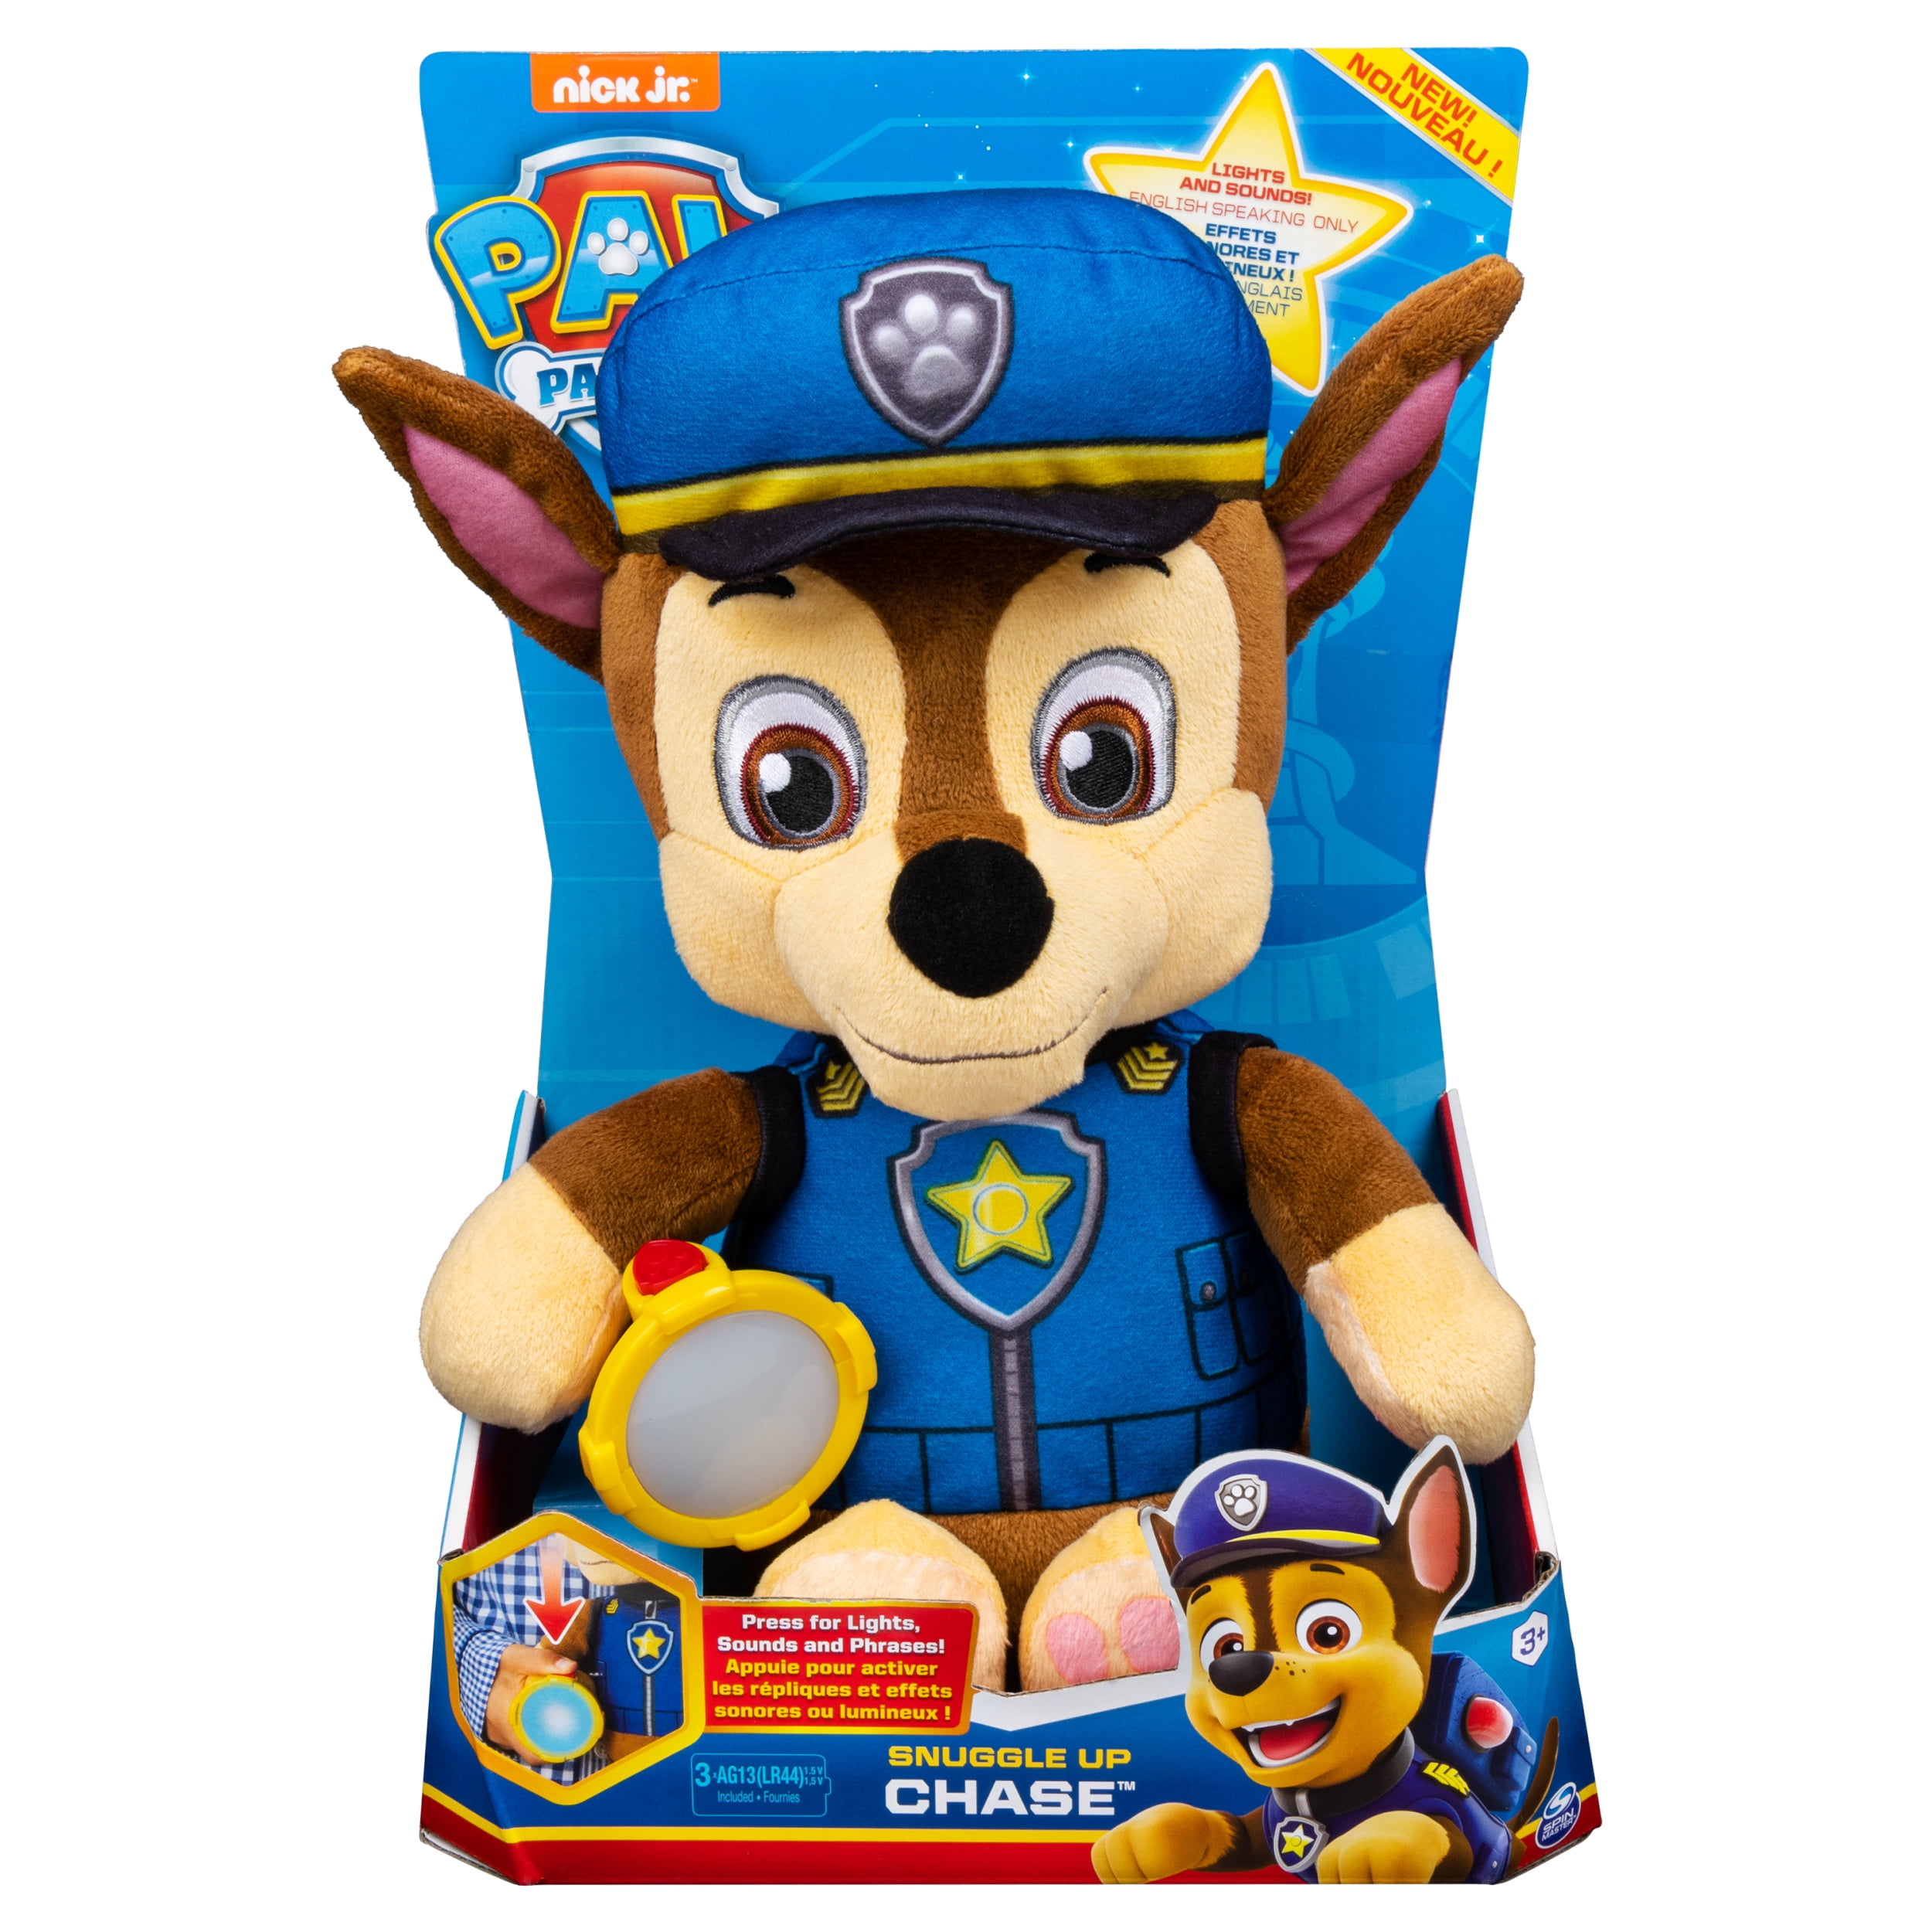 Paw Patrol Skye Plush Stuffed Animal With Light up Flashlight and Lullaby Sounds for sale online 